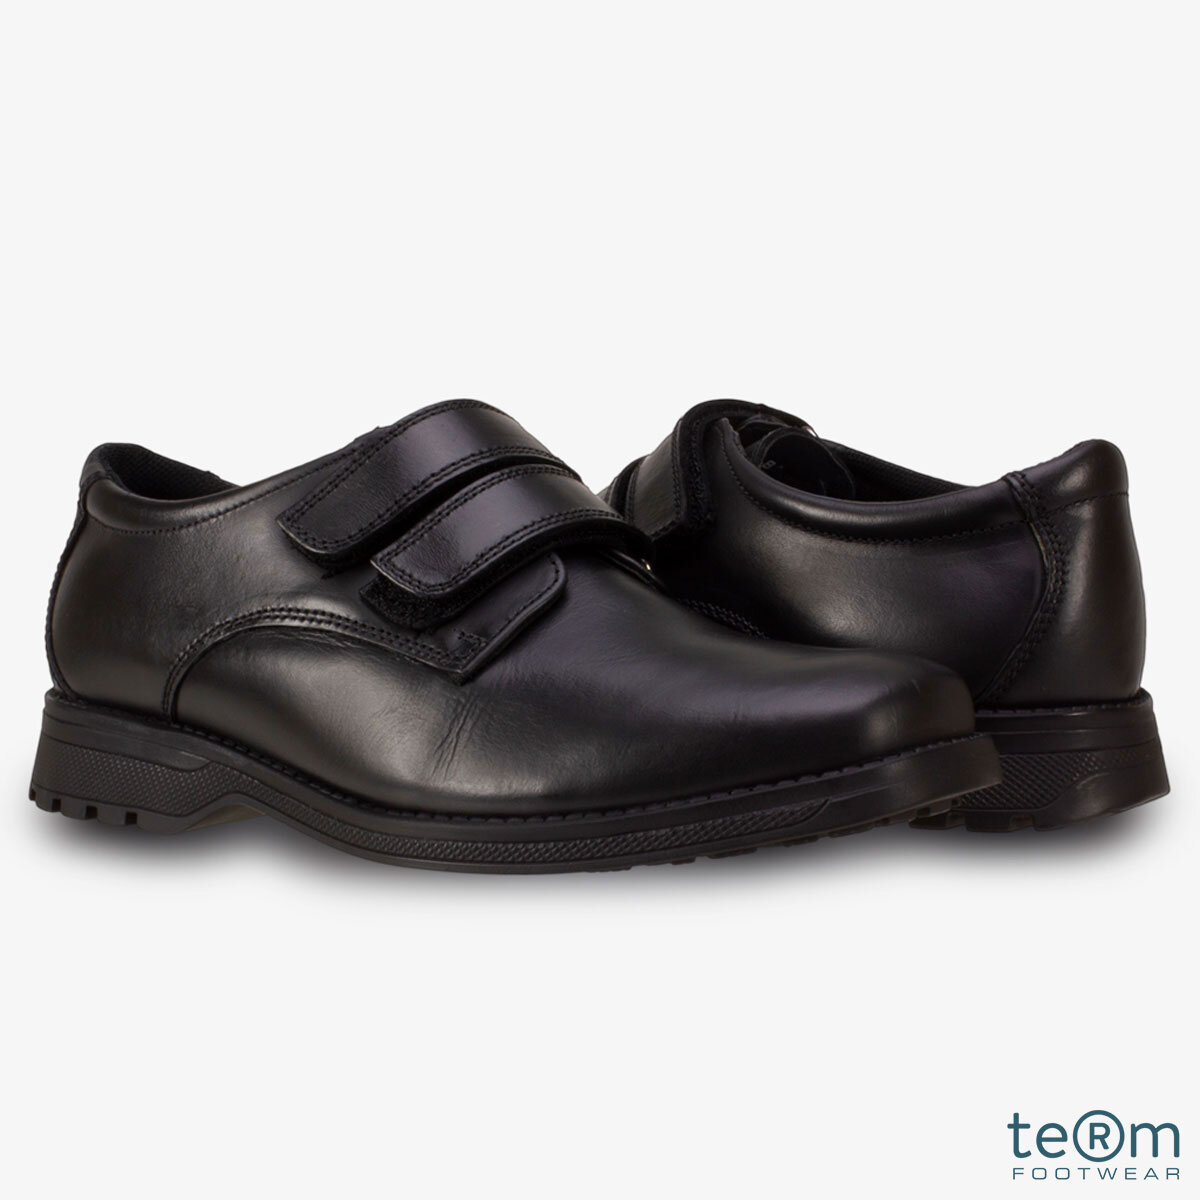 TeⓇm Class Leather Boy's School Shoes in 10 Sizes